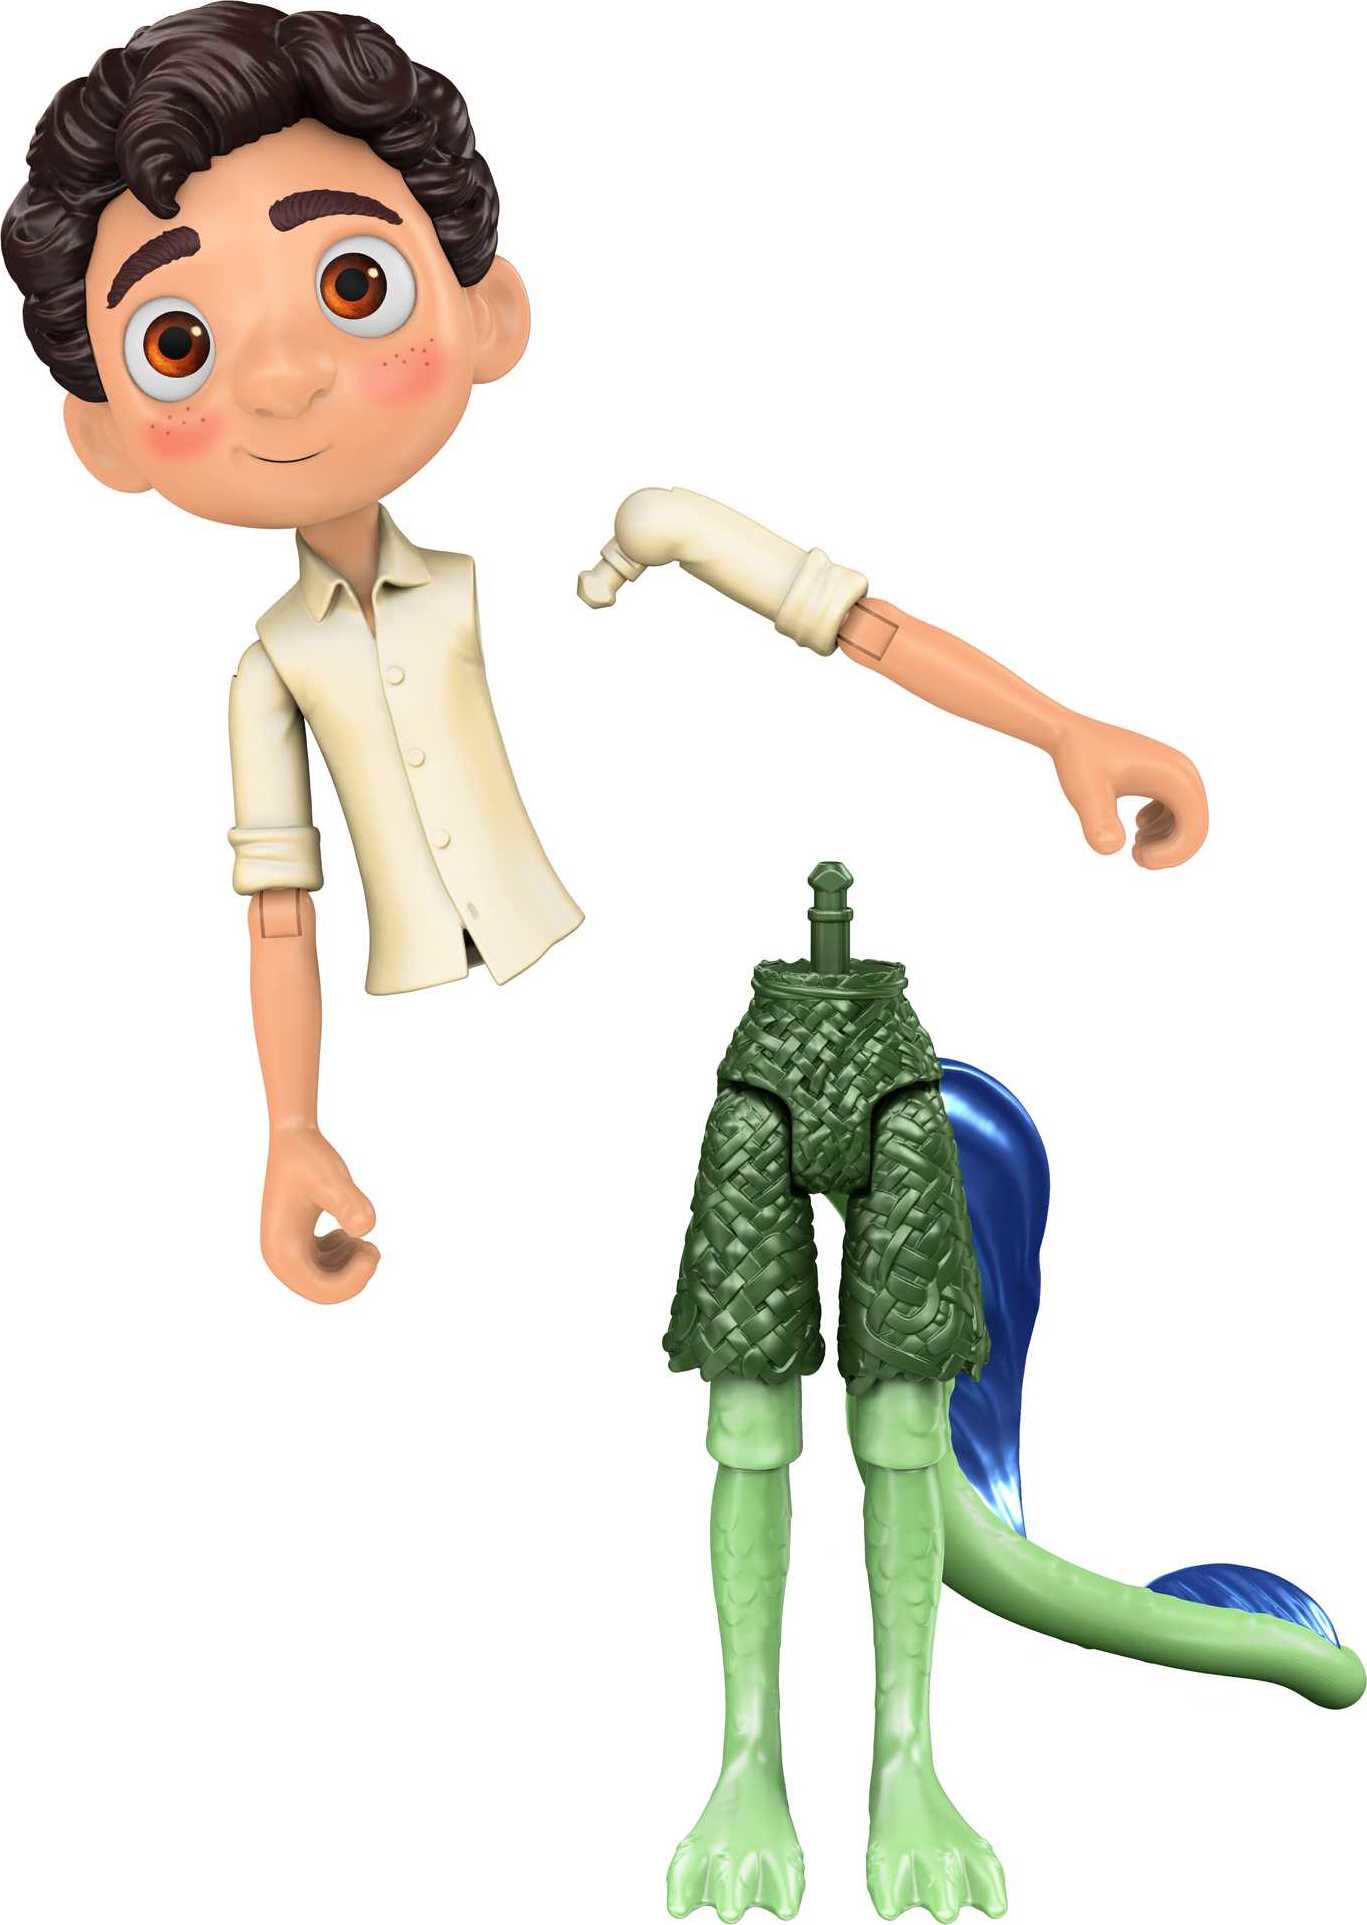 Disney and Pixar Luca, Luca Paguro Action Figure, Highly Posable